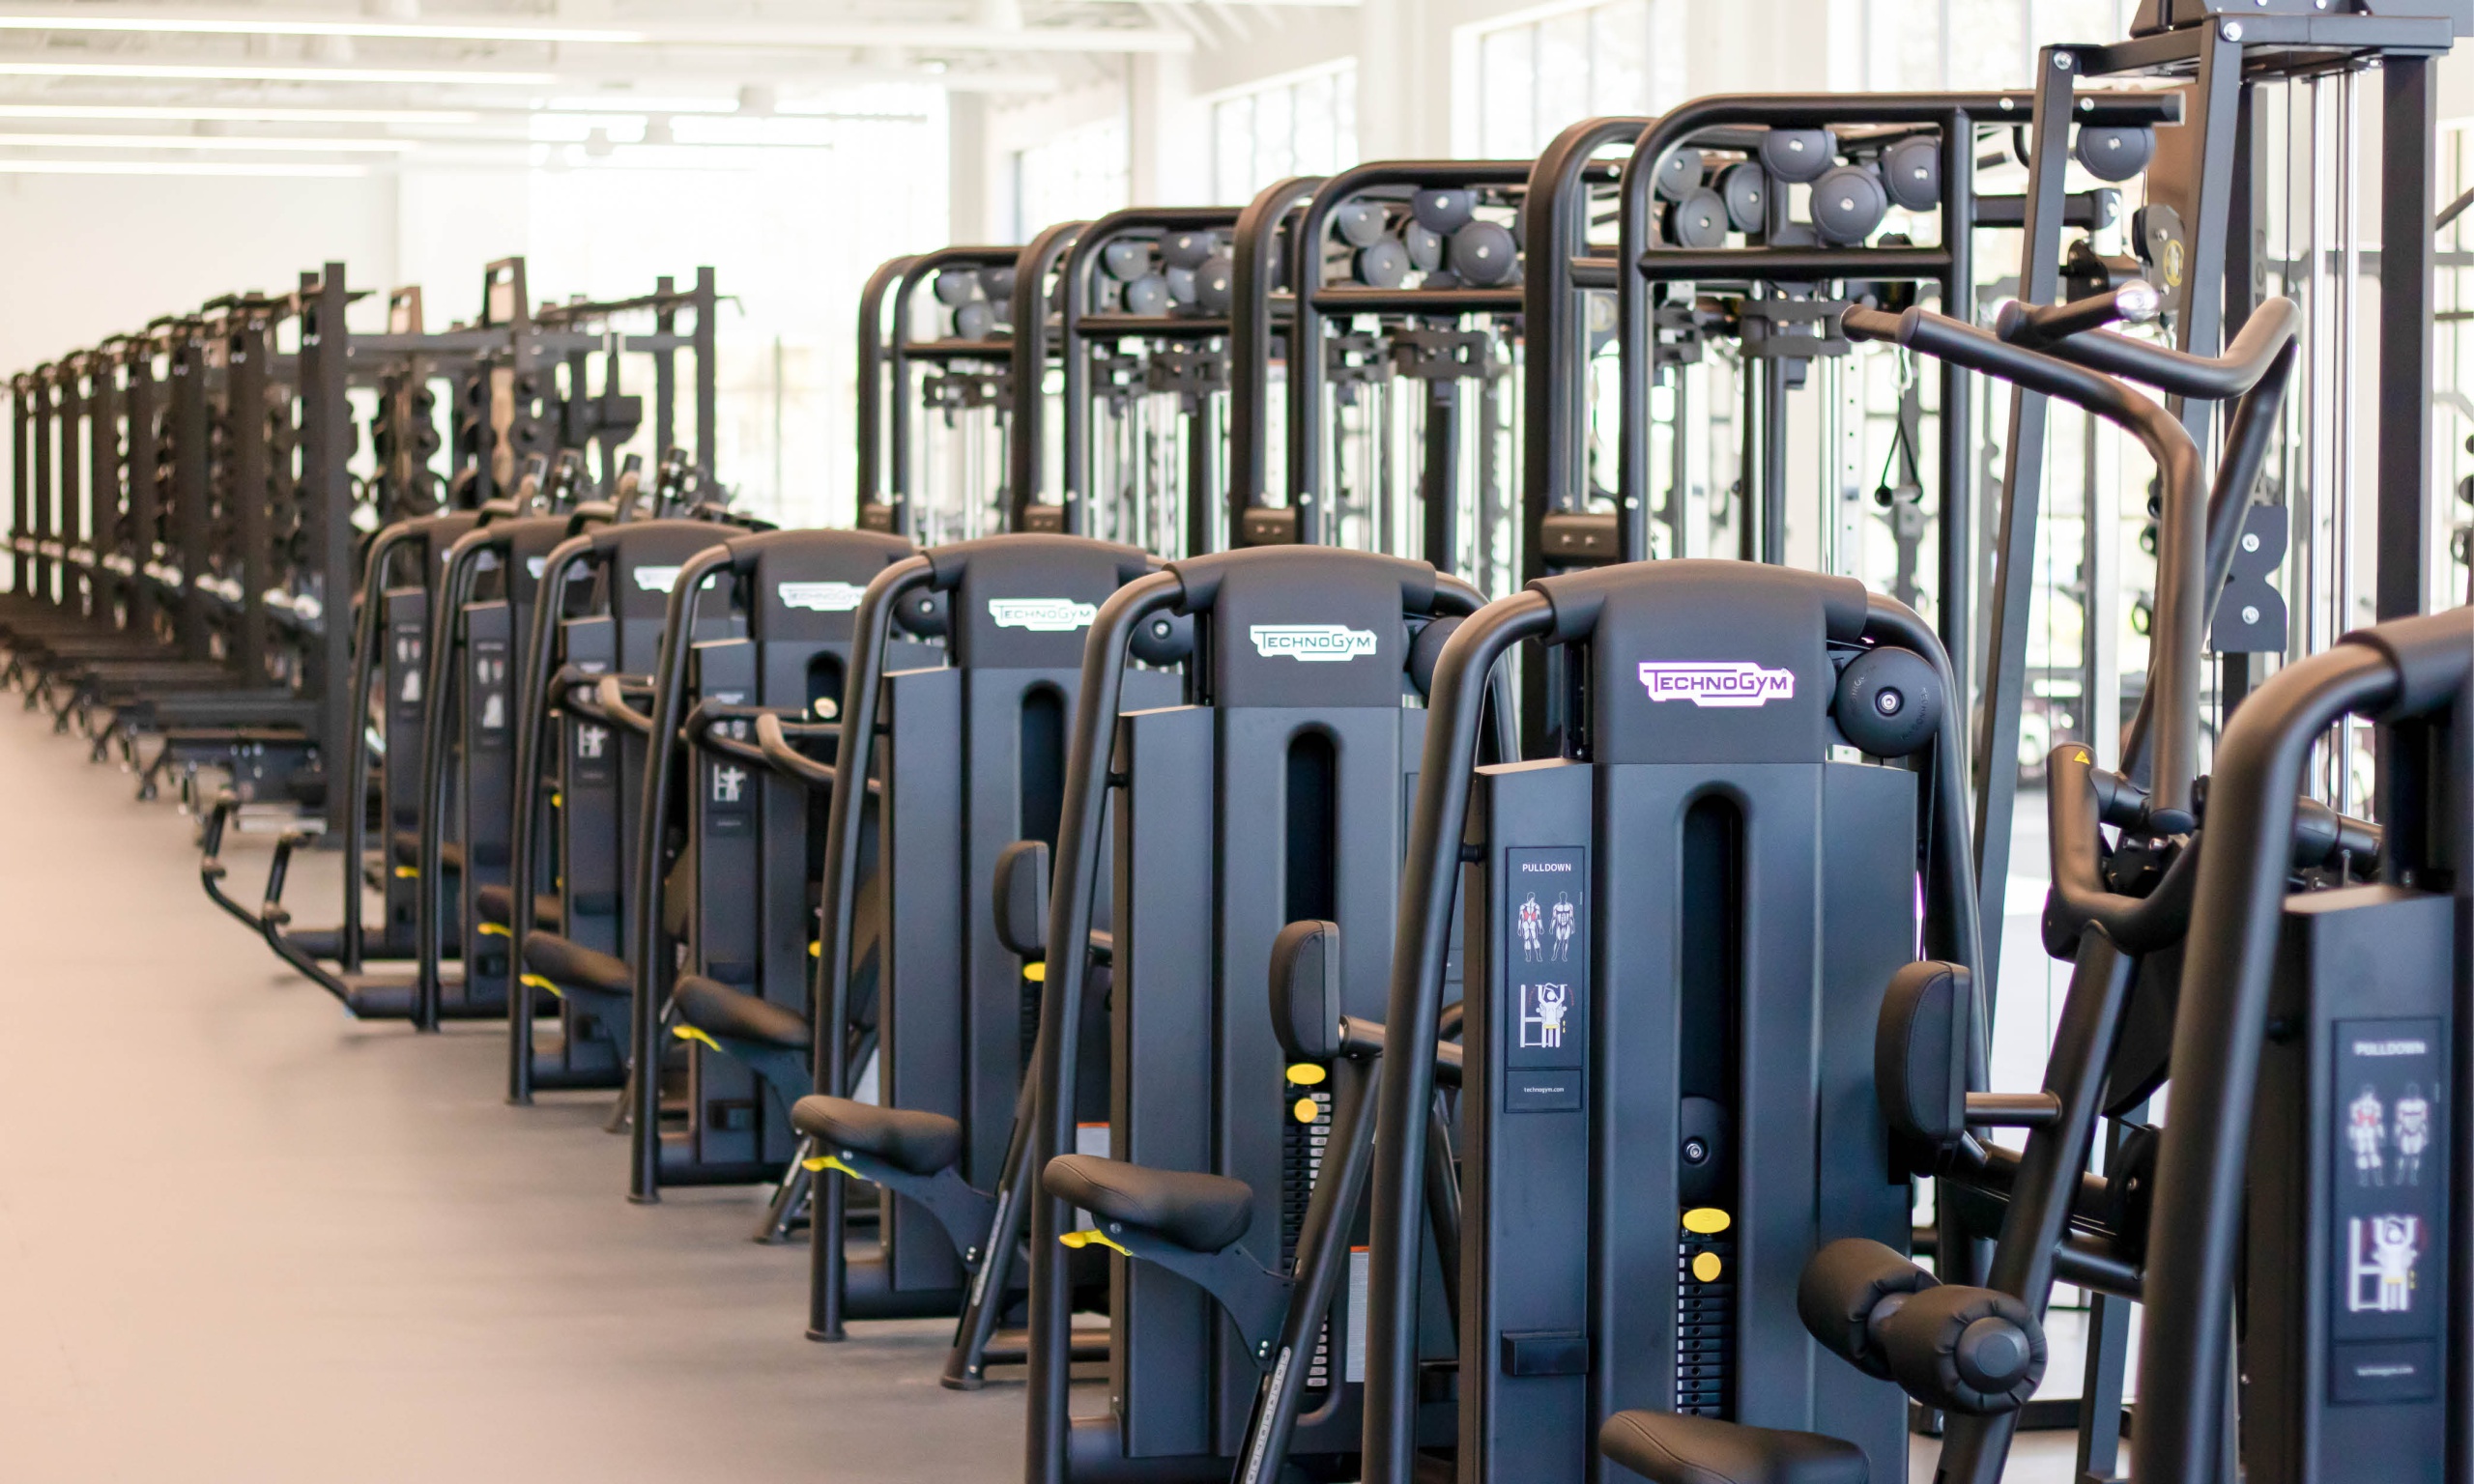 Overview of the leg lift equipment inside the Strength & Conditioning room at the Polo Road Rec Center